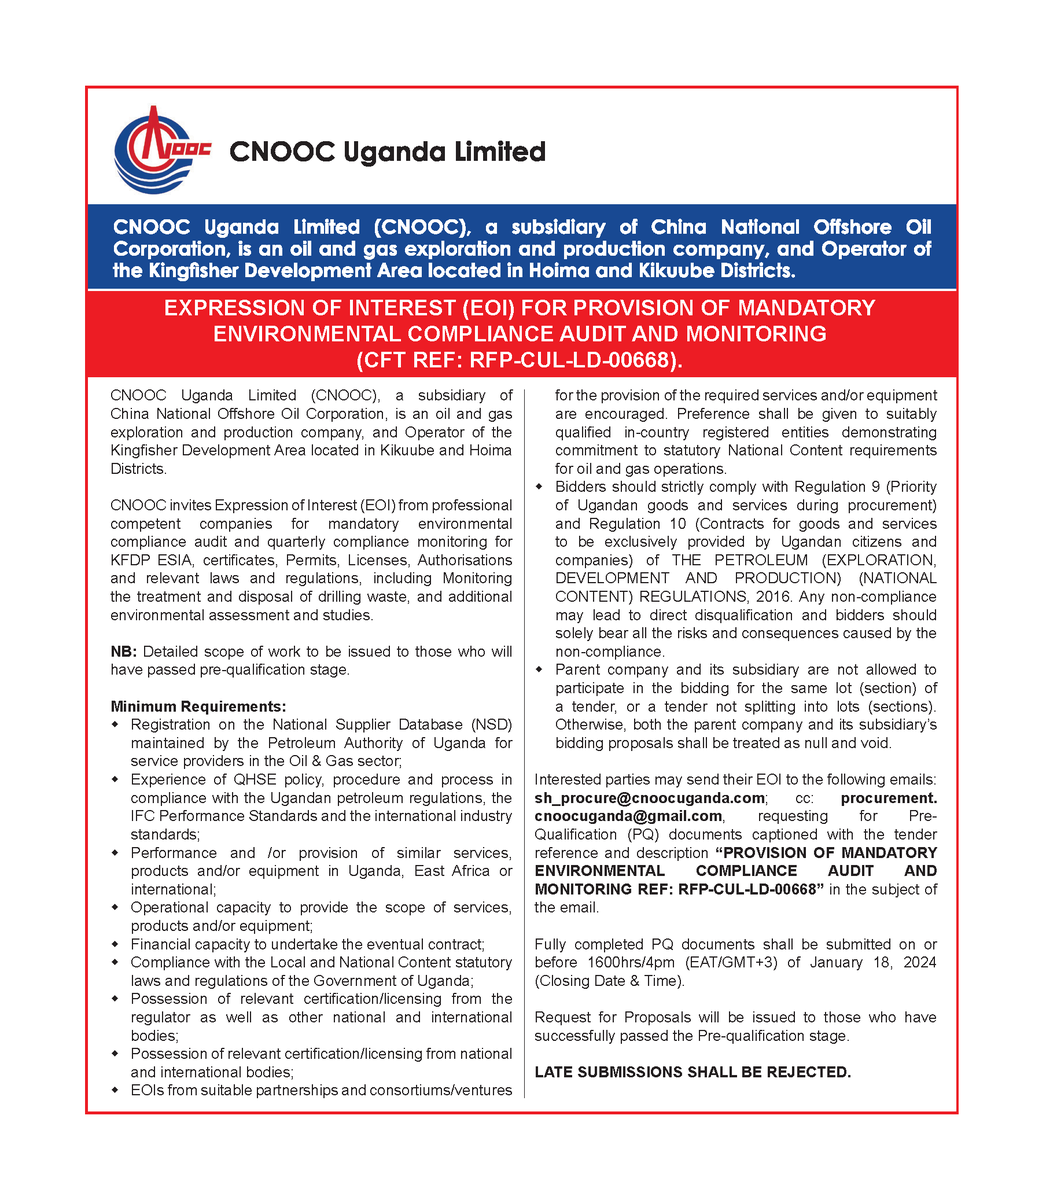 REQUEST FOR EOI FOR PROVISION OF MANDATORY ENVIRONMENTAL COMPLIANCE AUDIT AND MONITORING. Send EOI to: sh_procure@cnoocuganda.com cc: procurement.cnoocuganda@gmail.com, to request for PQ documents before 1600hrs/4pm (EAT) of January 18, 2024. LATE SUBMISSIONS SHALL BE REJECTED!